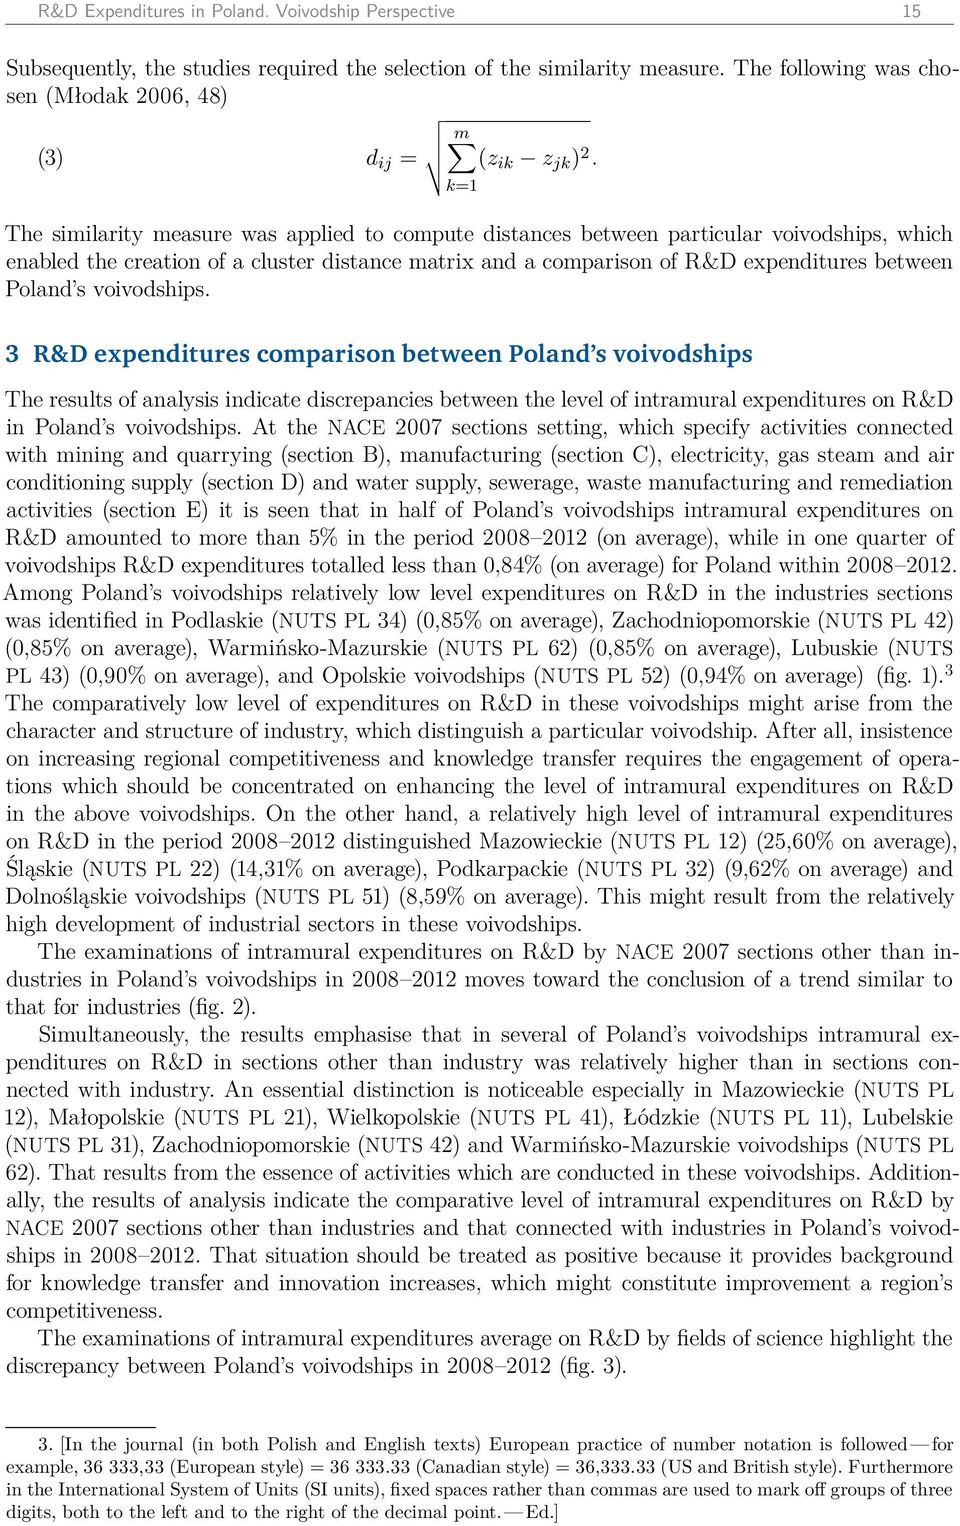 k=1 The similarity measure was applied to compute distances between particular voivodships, which enabled the creation of a cluster distance matrix and a comparison of R&D expenditures between Poland